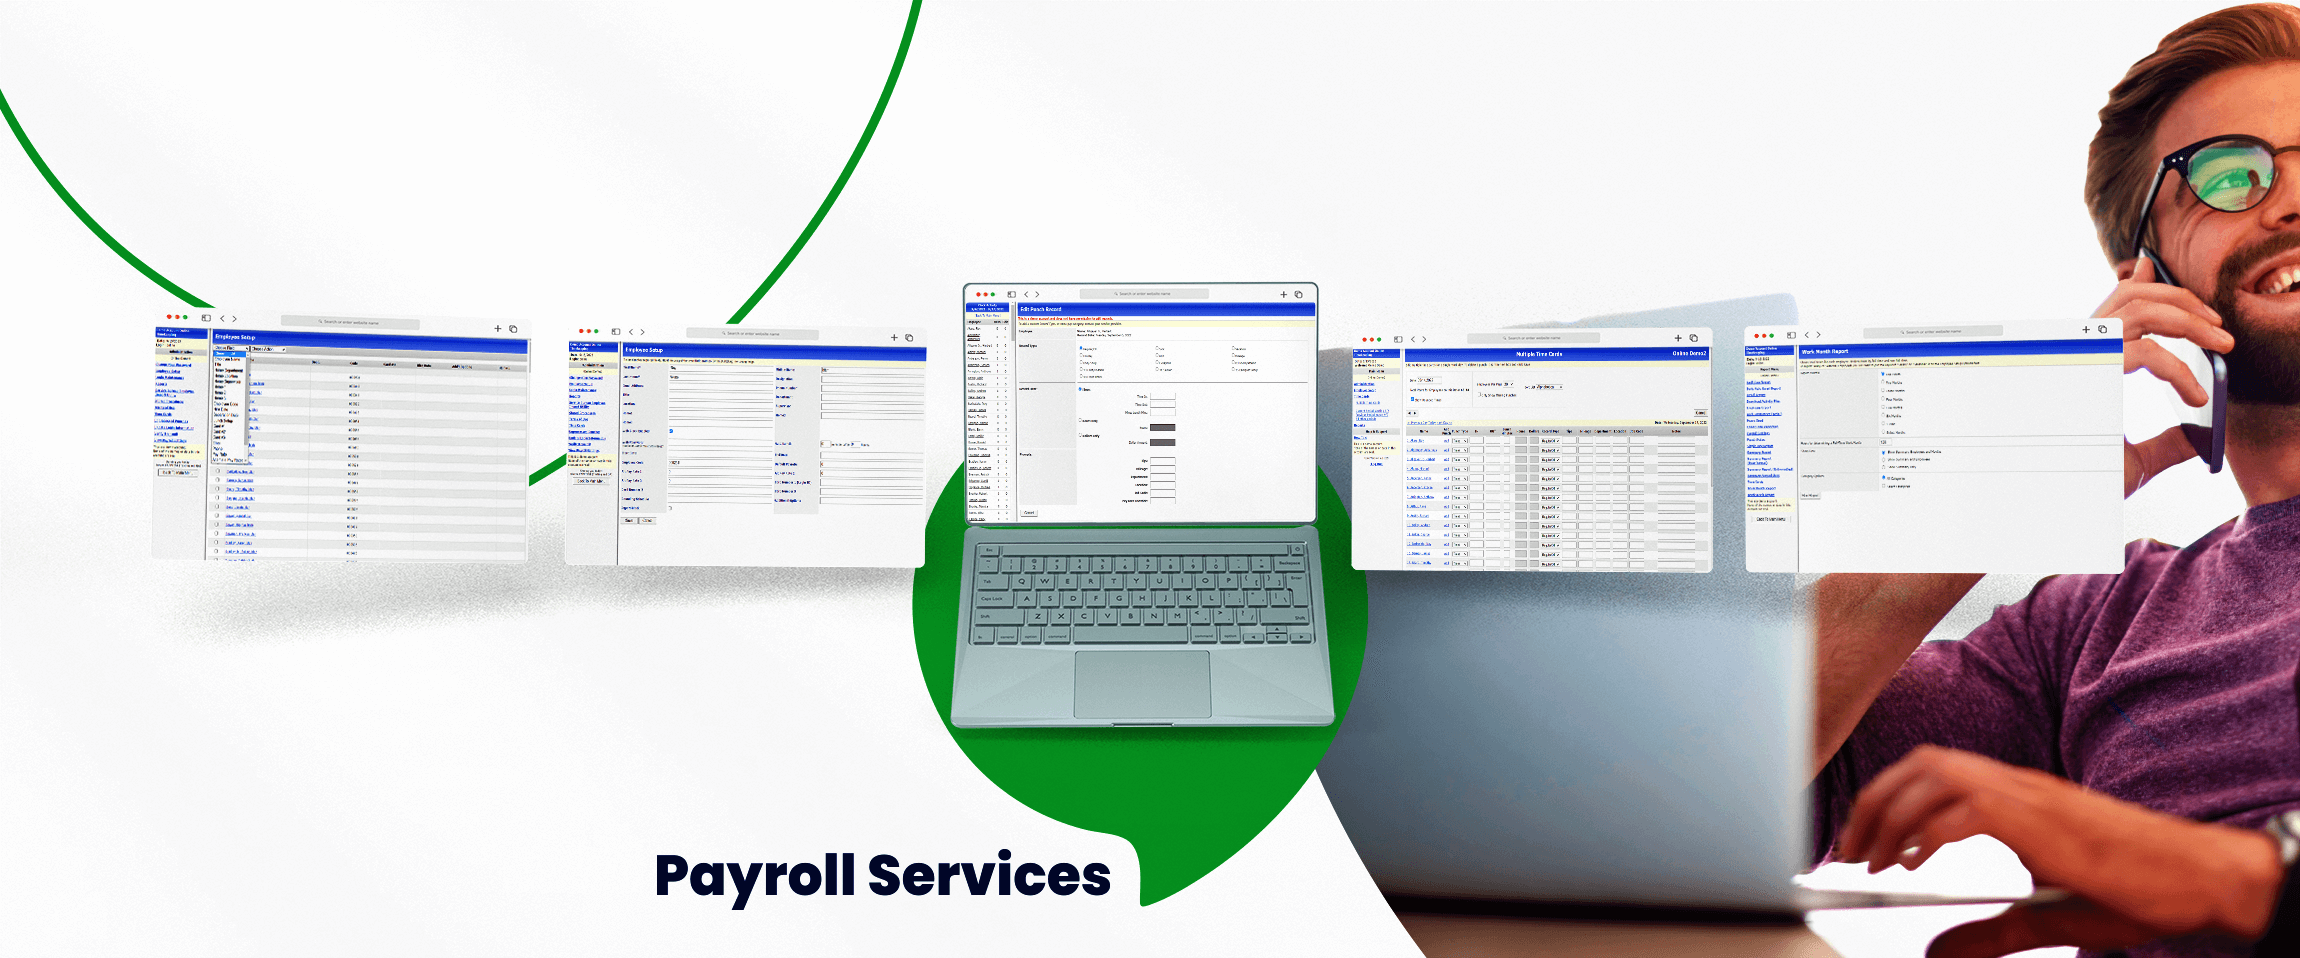 payroll-solutions-05